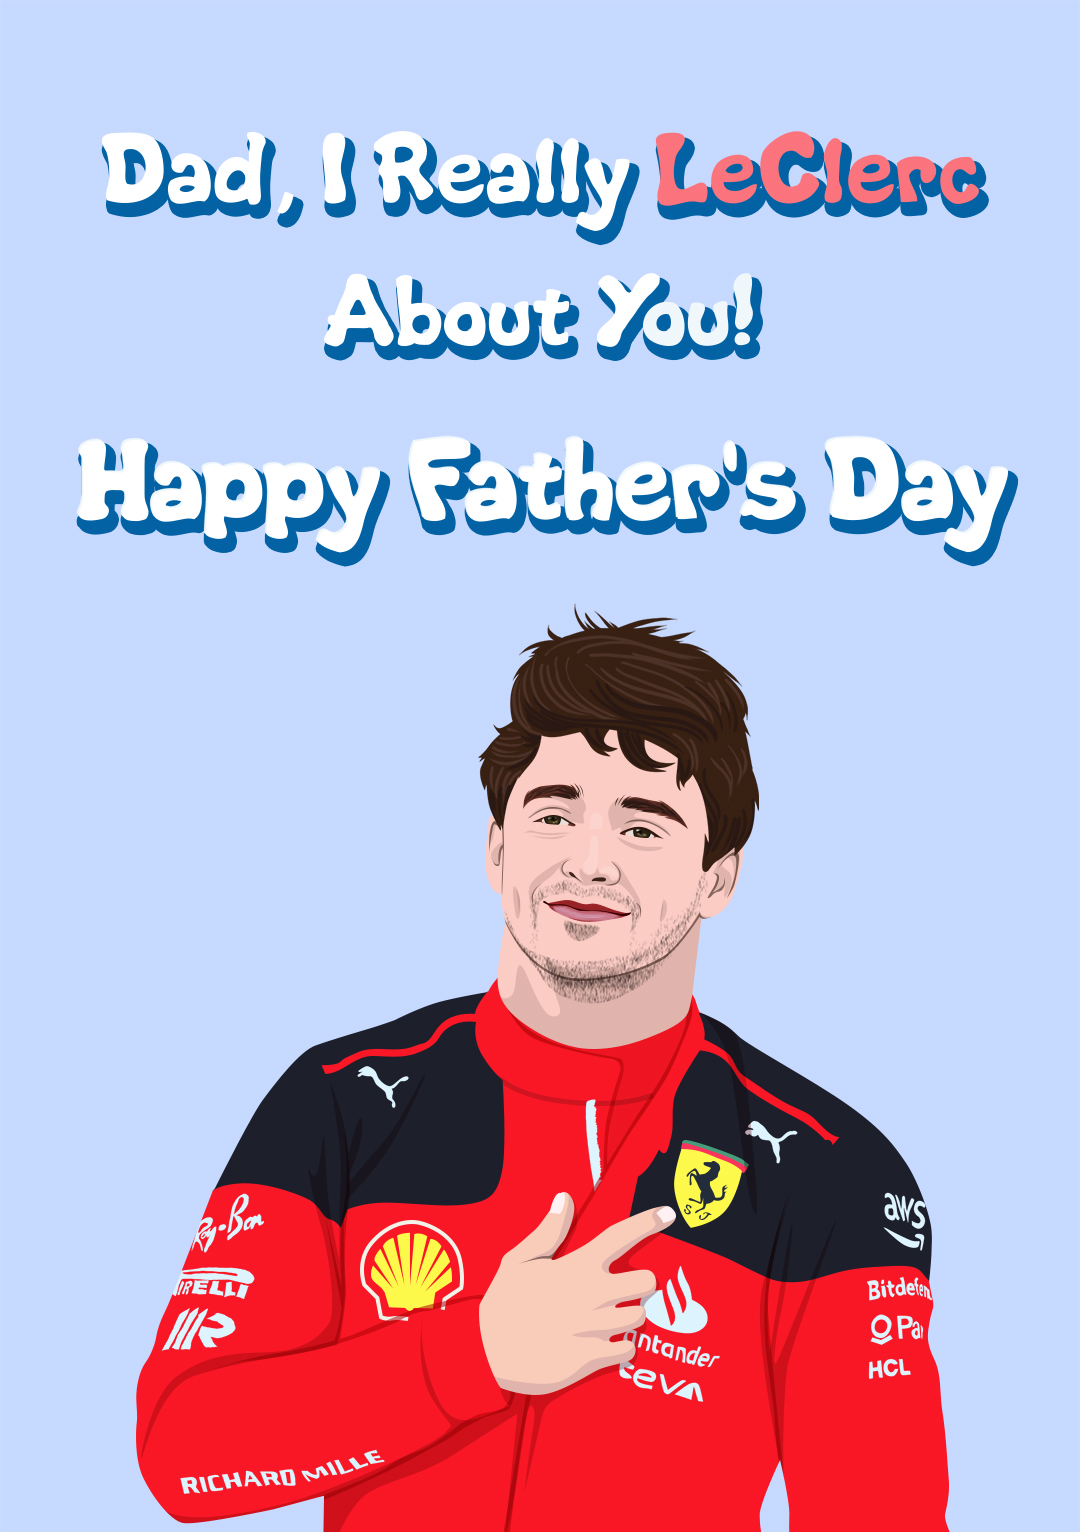 Dad, I Really LeClerc About You! - Father's Day Card